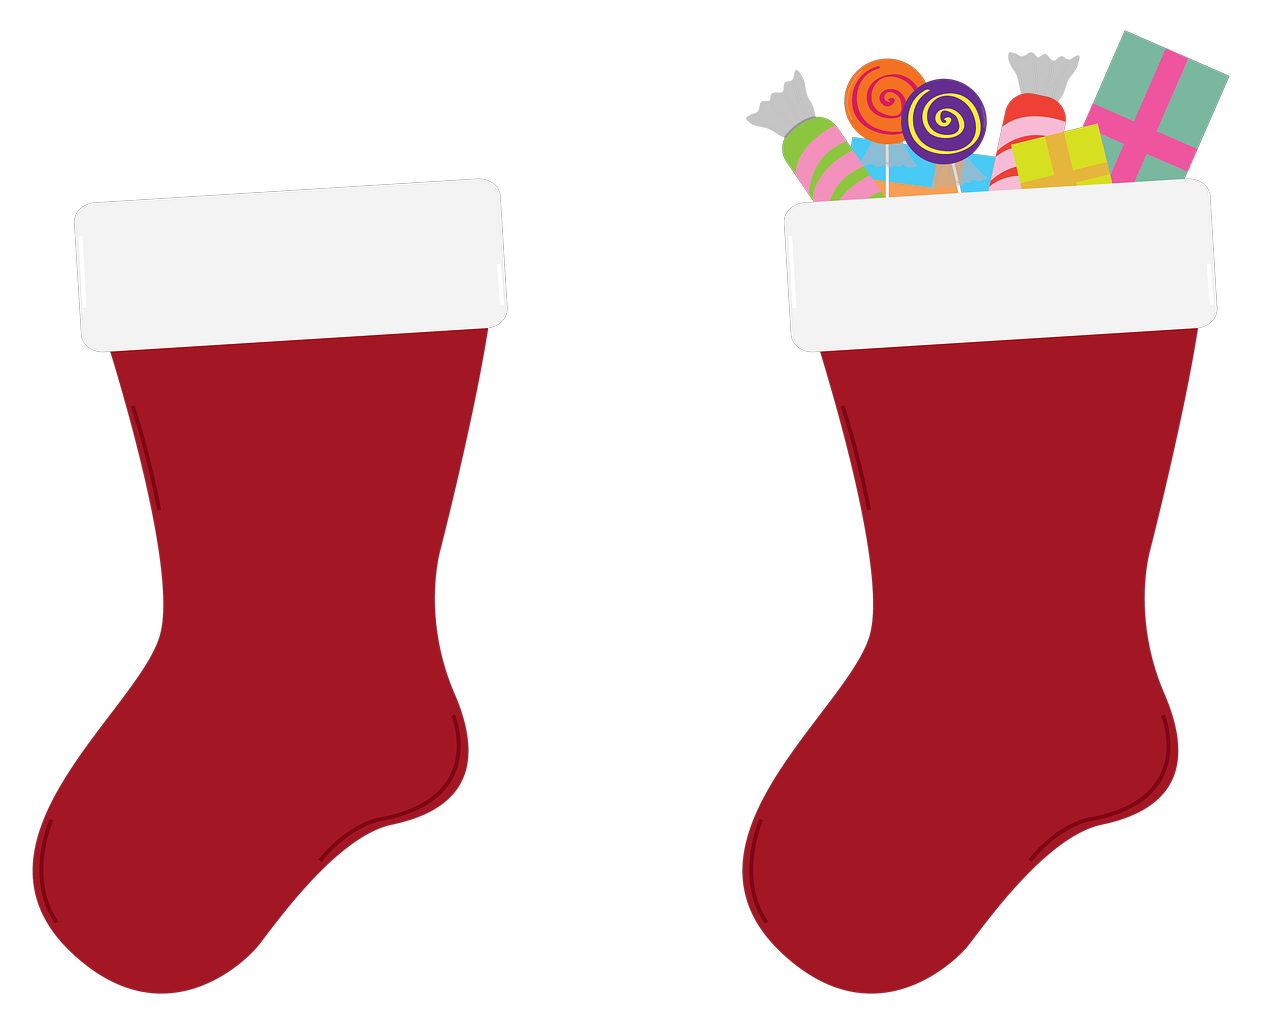 Two Christmas stockings, one has gifts and candy in it.